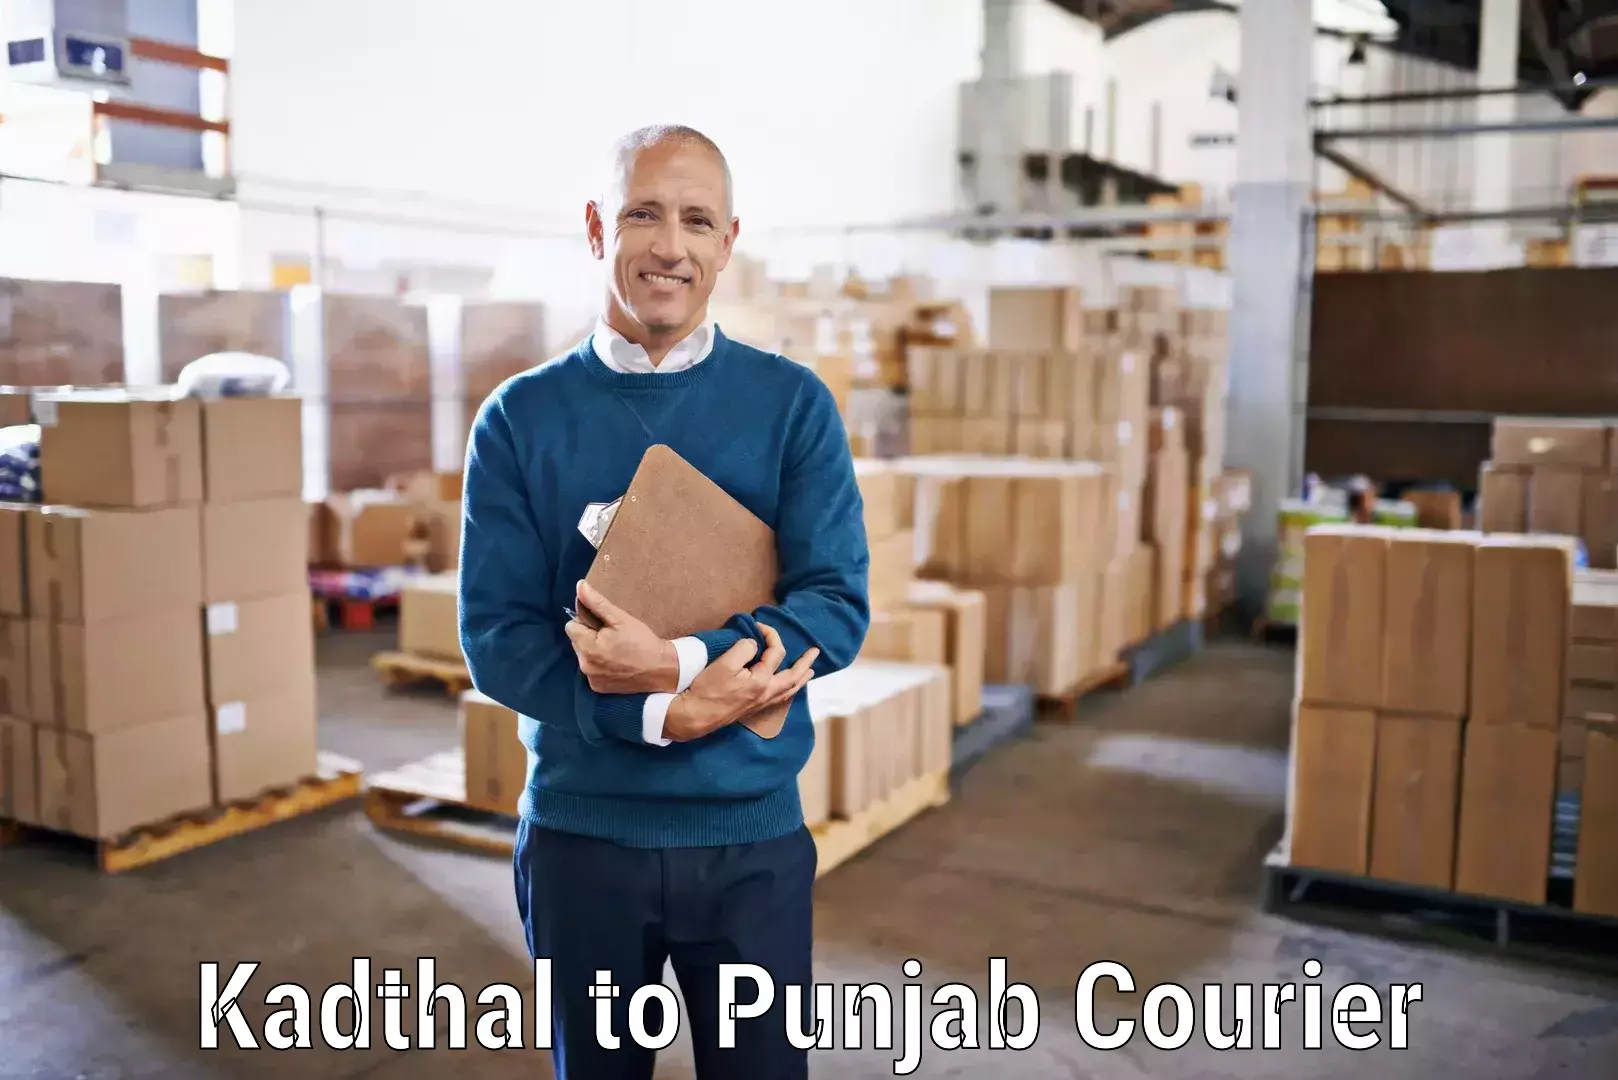 Rural area delivery Kadthal to Thapar Institute of Engineering and Technology Patiala